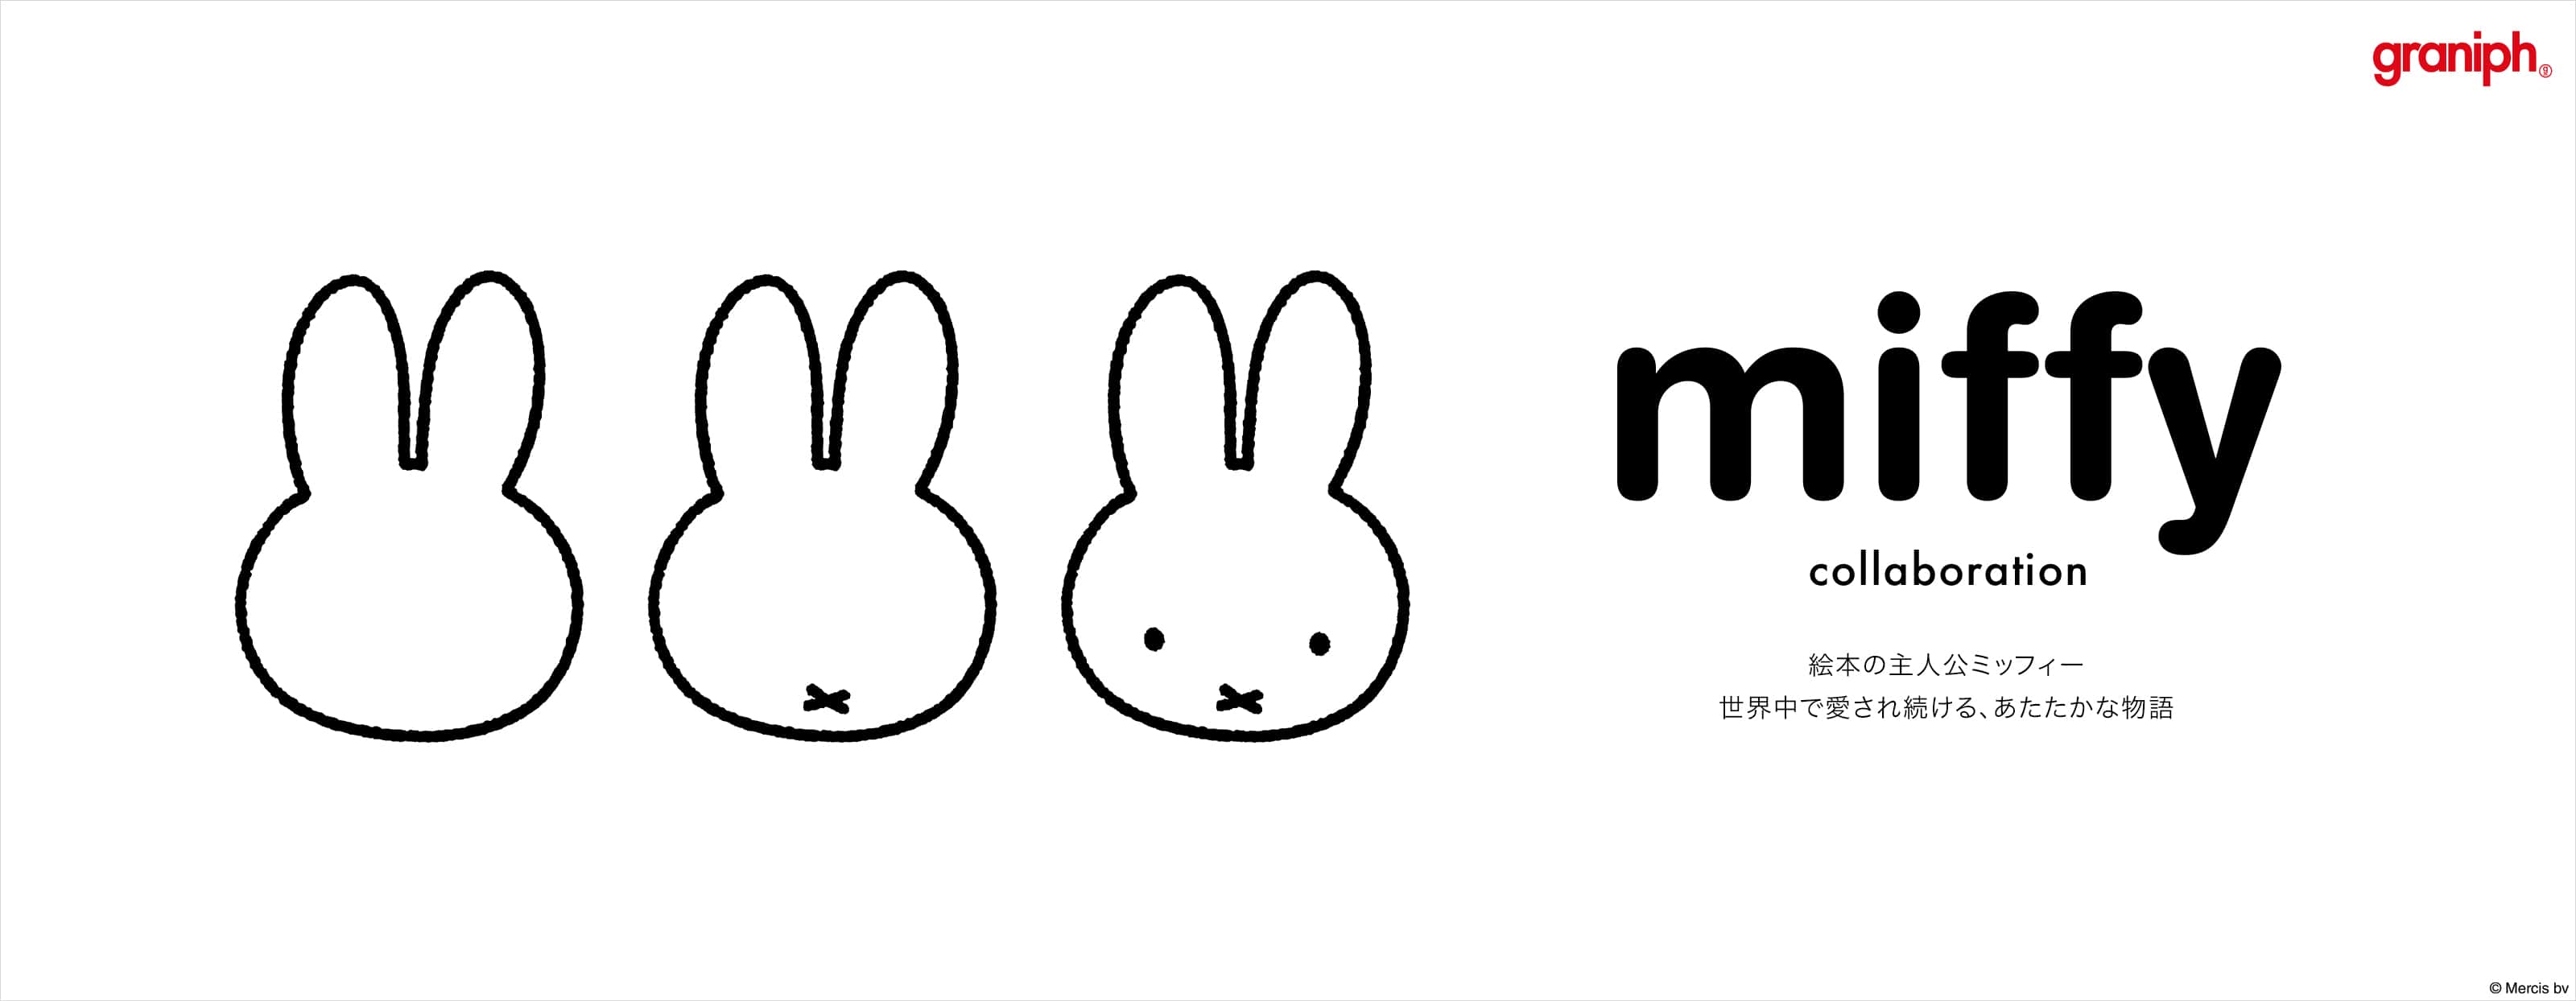 Miffy was "born" in 1955. While on holiday in Egmond aan Zee, Dick Bruna would tell his eldest son, Sierk, bedtime stories about a little, white bunny, who scampered around the garden of their holiday home. This bunny became the inspiration for Miffy. Miffy is Dick Bruna's best known and most popular character, featuring in more than 30 books. Many children are able to identify with Miffy and her adventures. She is uncomplicated and innocent, has a positive attitude and is always open to new experiences.[ssorder:-20230718]